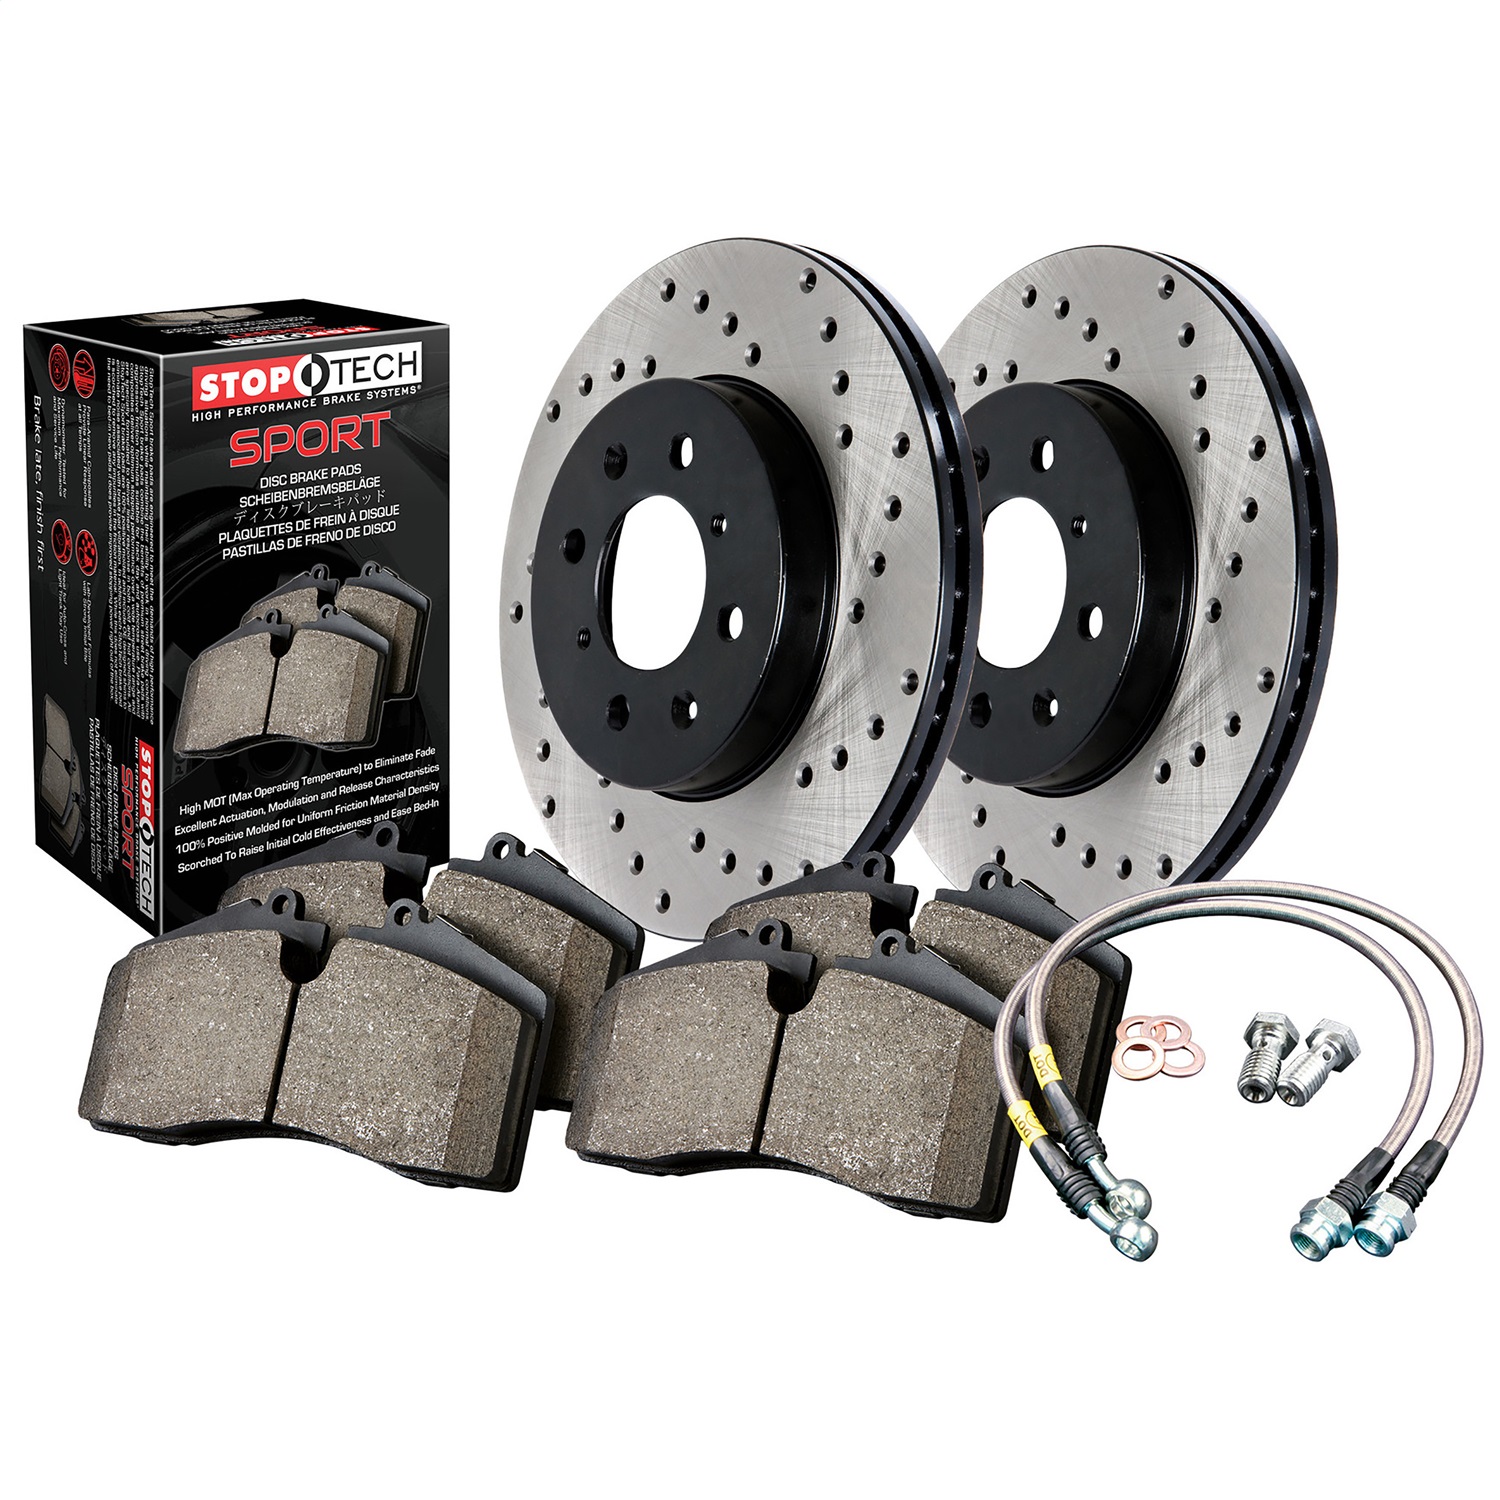 StopTech 979.40035F Sport Disc Brake Kit w/Cross-Drilled Rotors Fits Accord